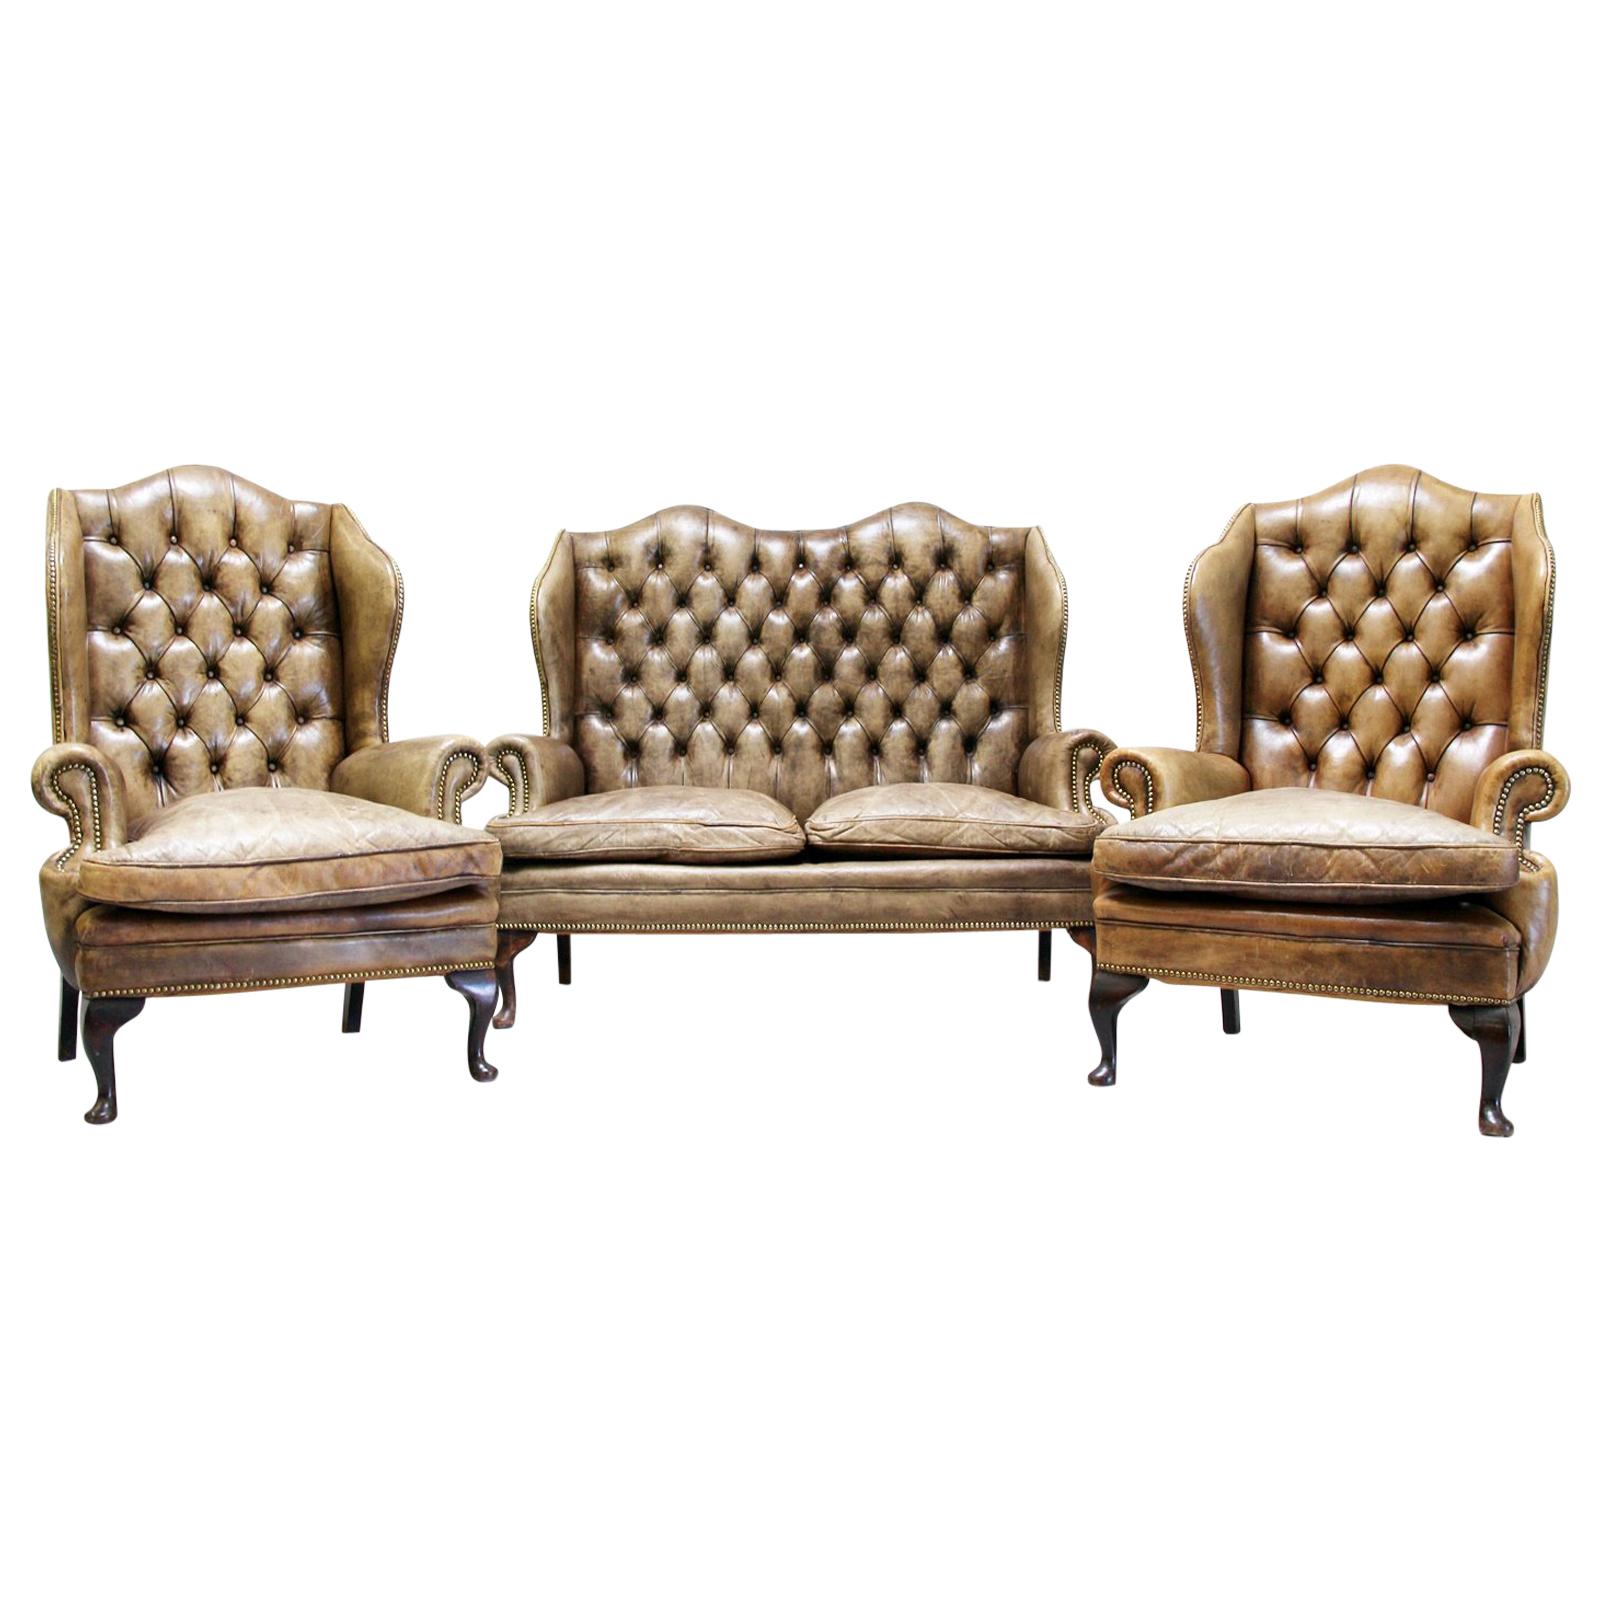 Chesterfield Sofa Set Armchair Couch Antique Wing Chair For Sale